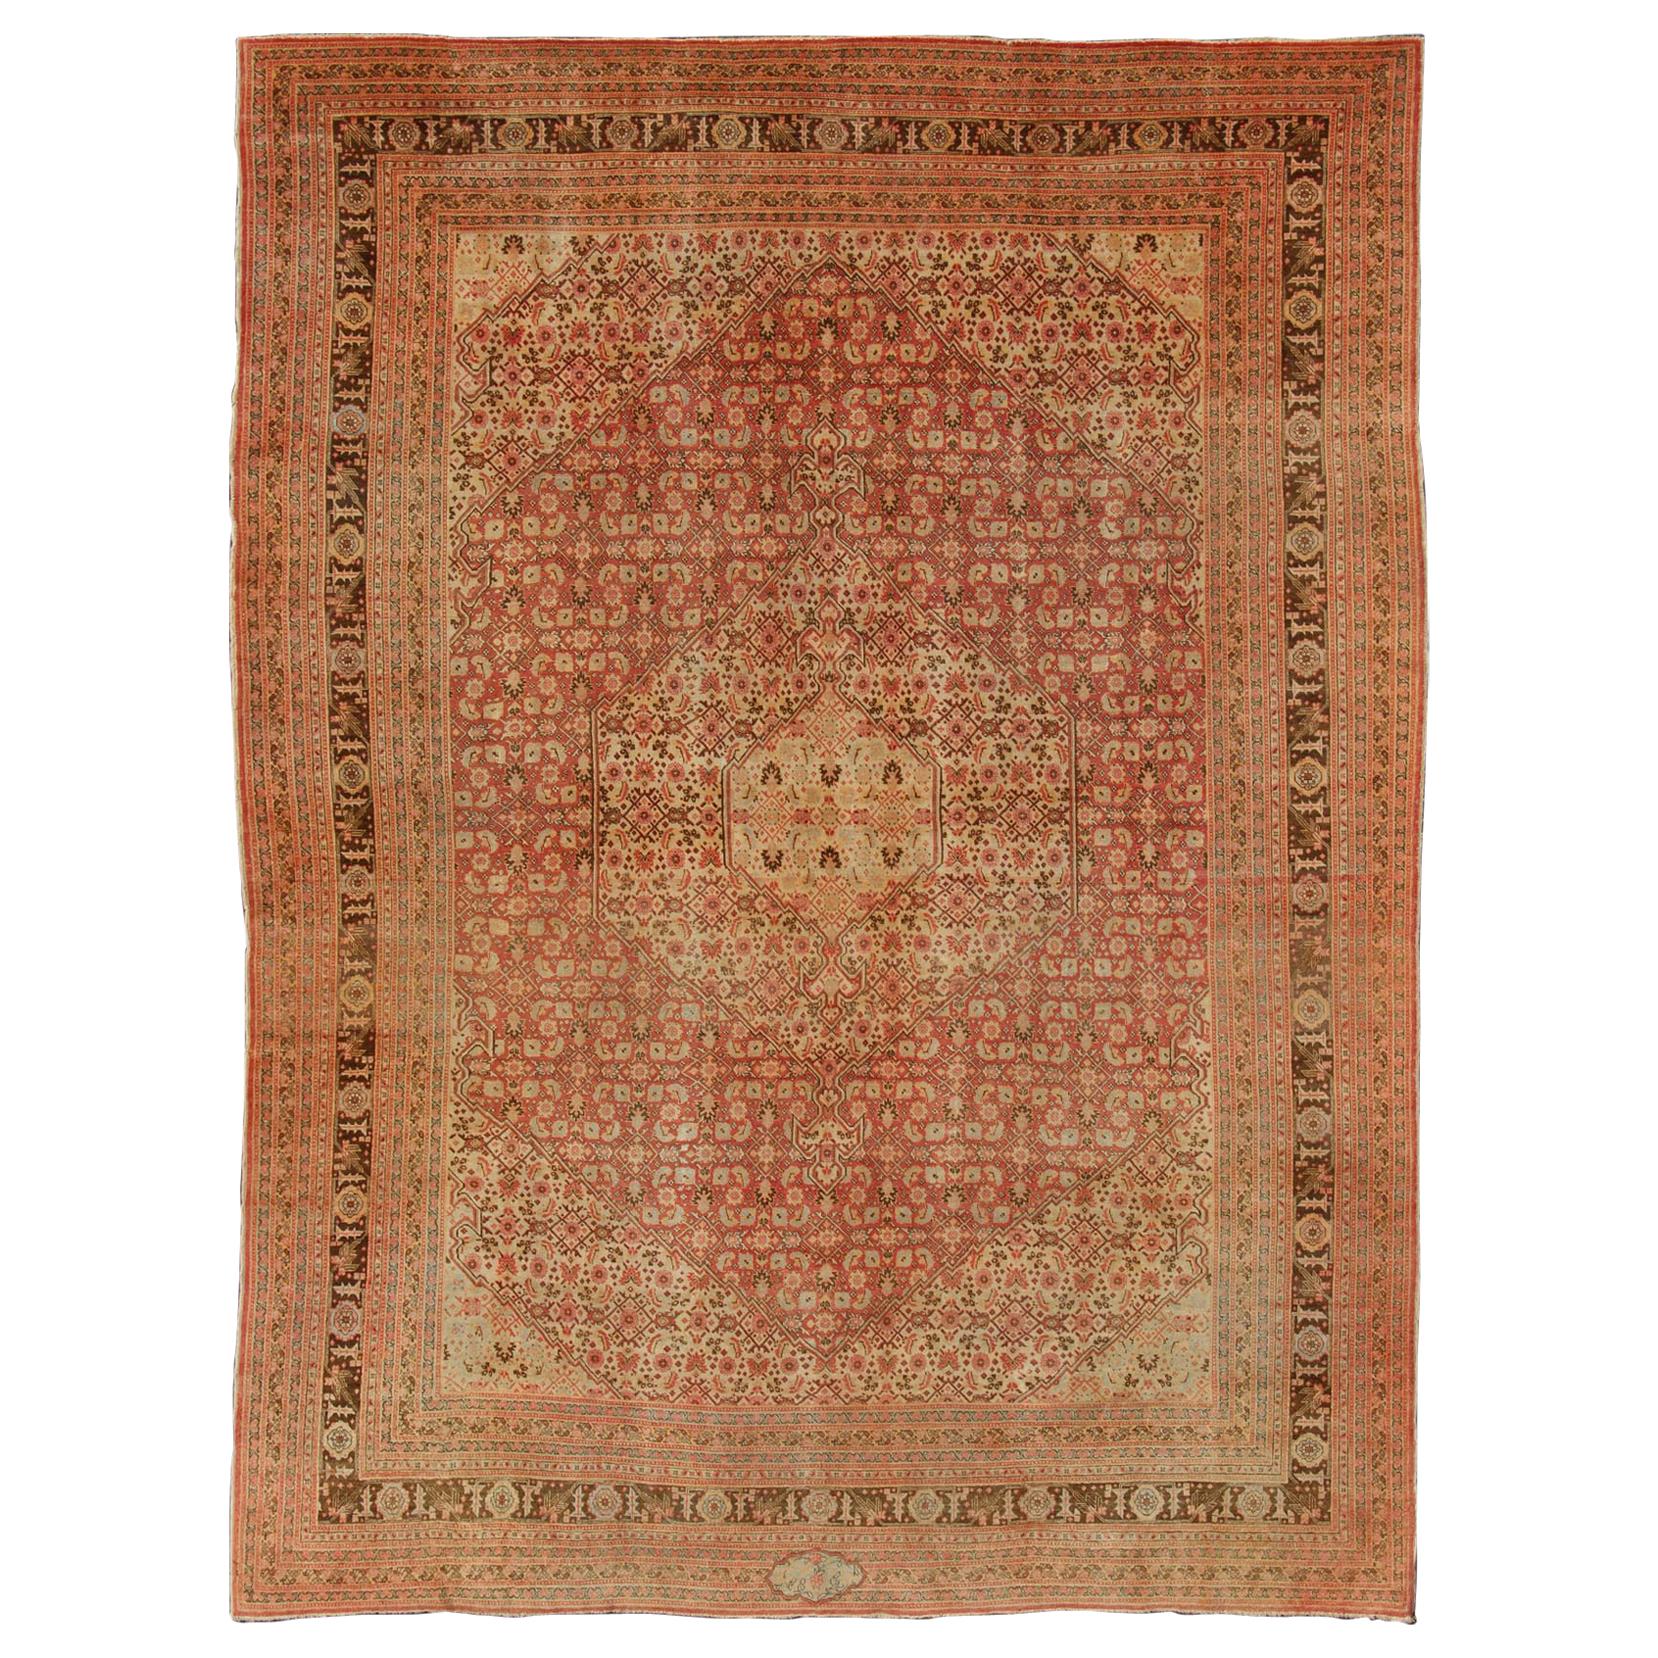 Antique Persian Tabriz Rug with Medallion Design in Coral, Cream and Brown Tones